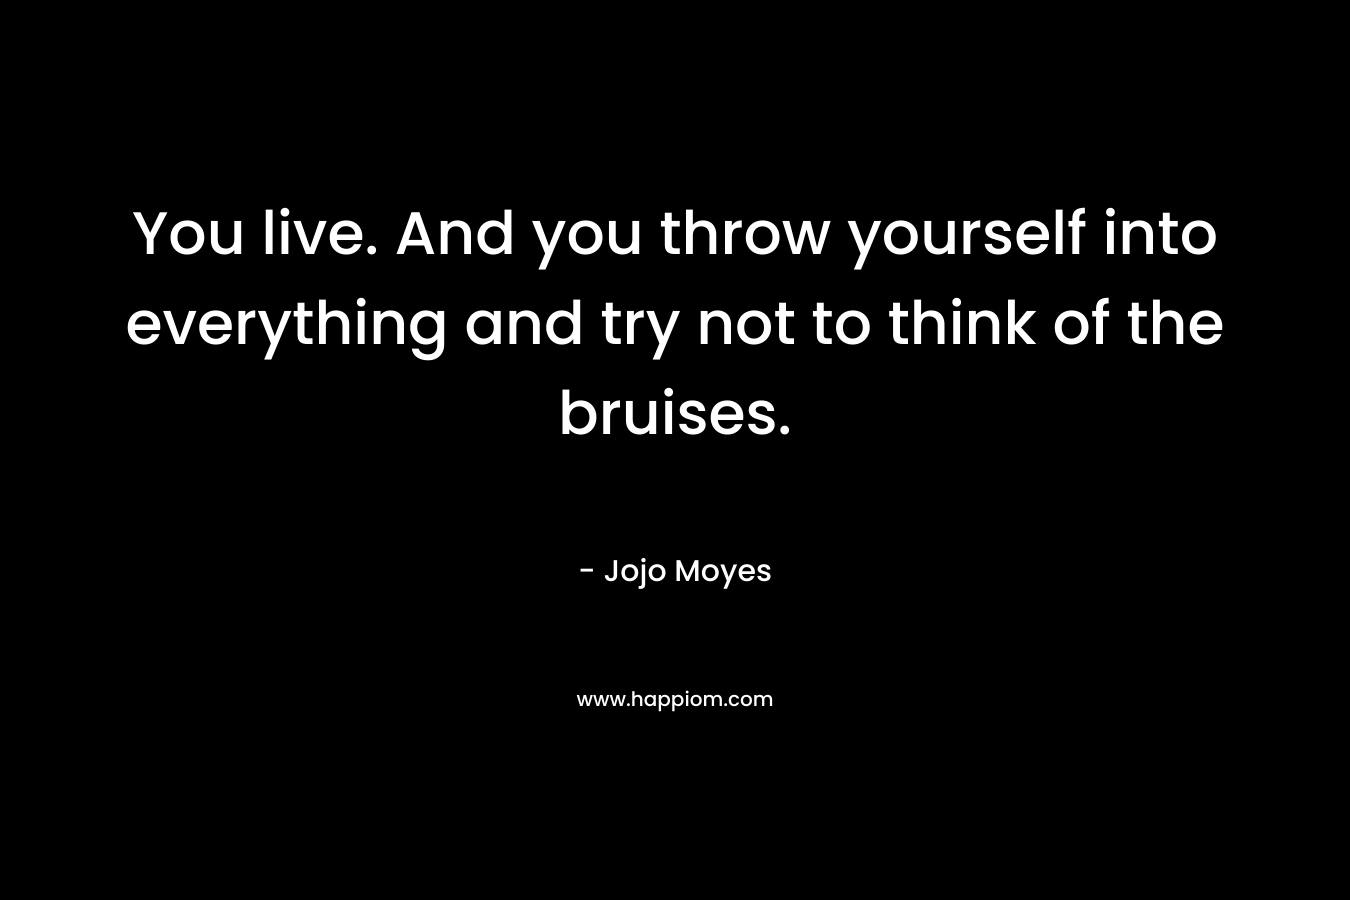 You live. And you throw yourself into everything and try not to think of the bruises. – Jojo Moyes